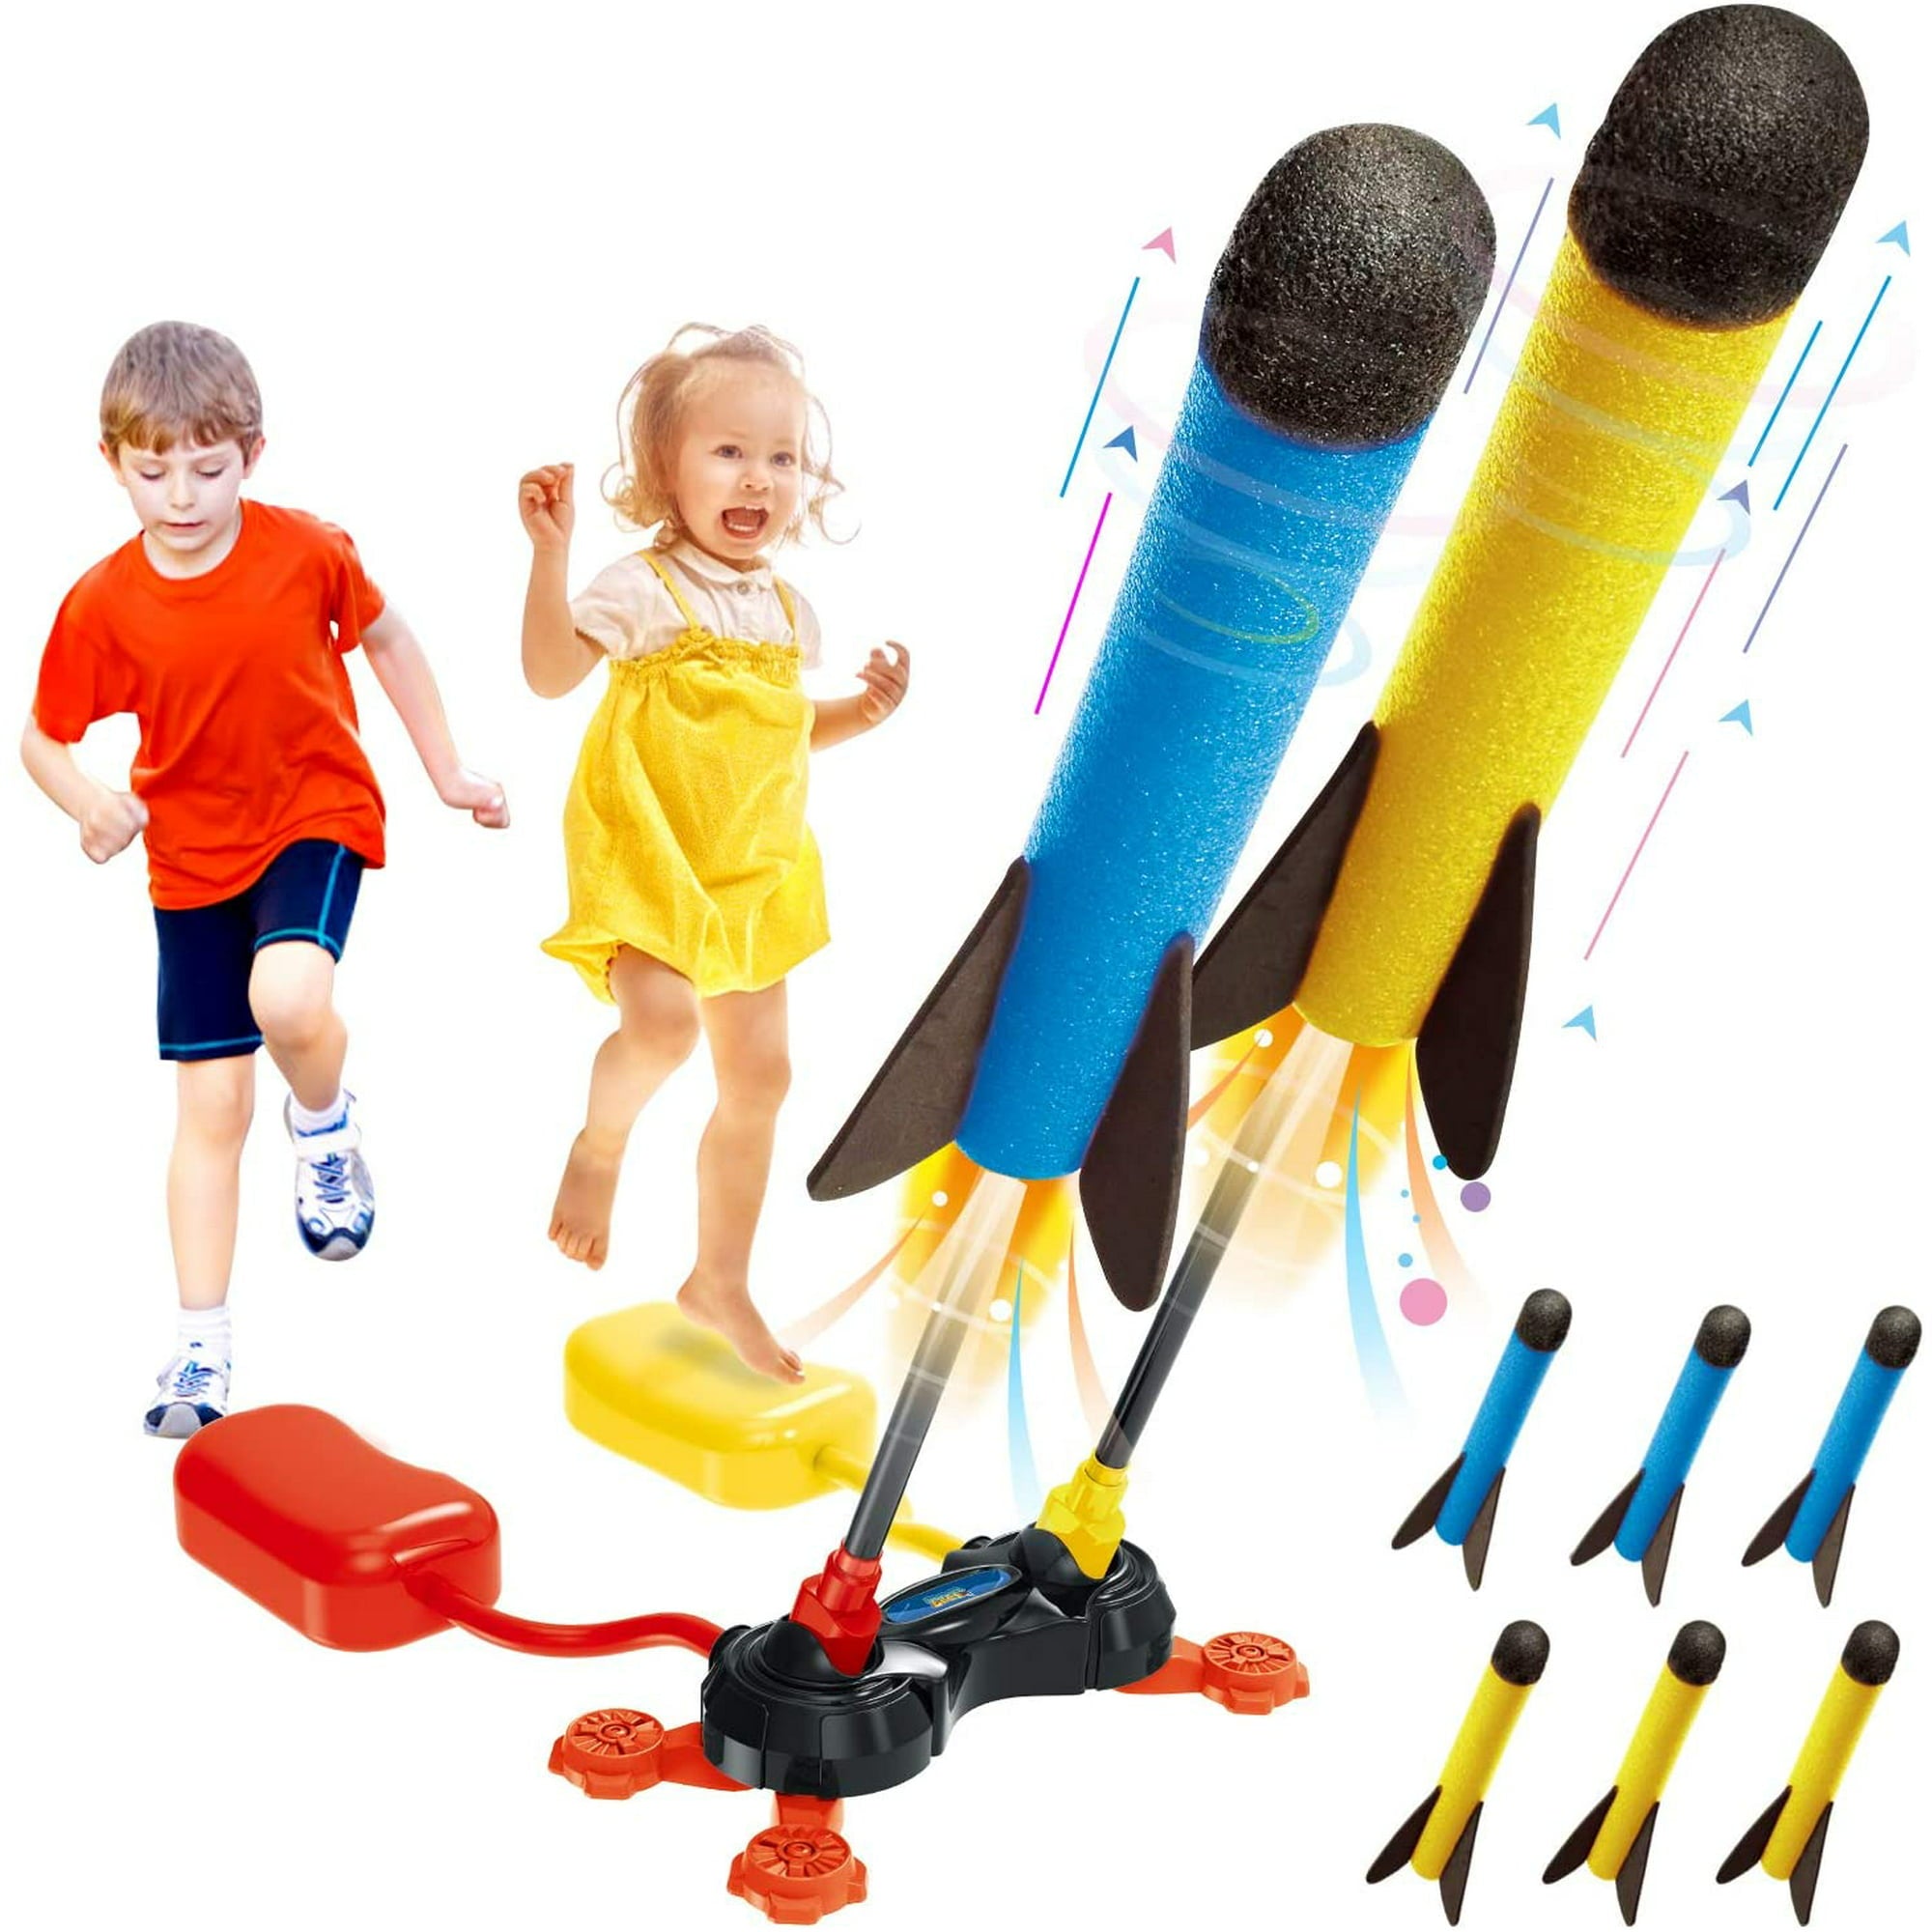 Terra Toy Rocket Launcher for Kids 3-5,Outdoor Toys for Kids Ages 8-12,Boy Toys Age 6-8 Jump Rocket Set 6 Foam Rockets & 2 Stomp Launchers,Space Toys Gifts for 4 5 6 7 8 Year Old Boys & Girls